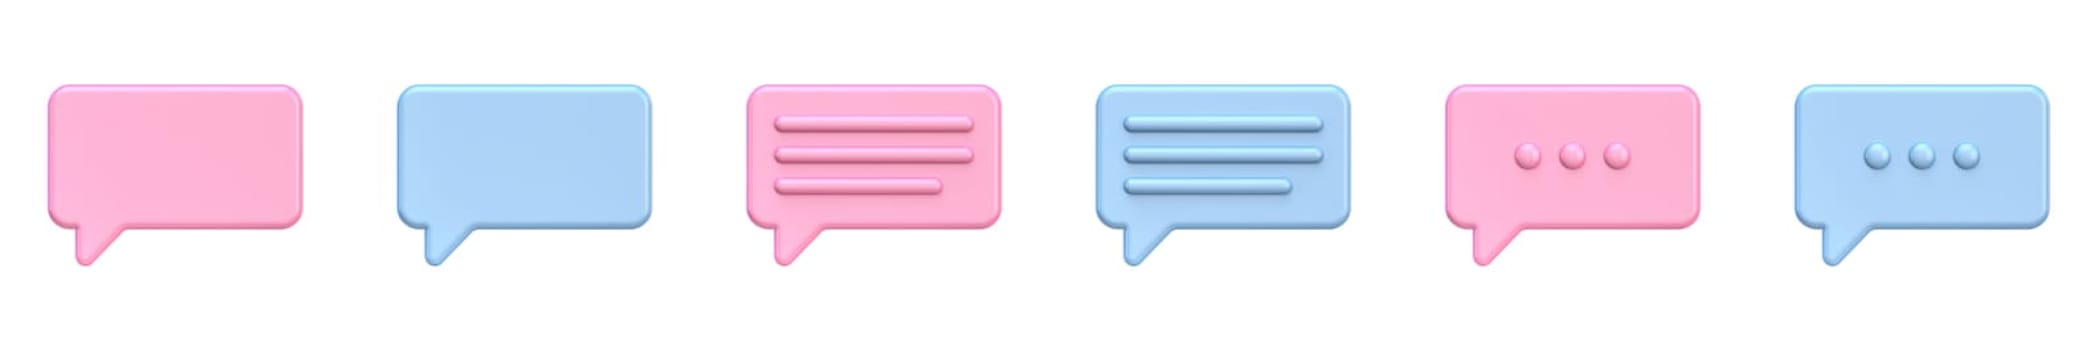 Collection of rectangular speech bubbles 3D rendering illustration isolated on white background